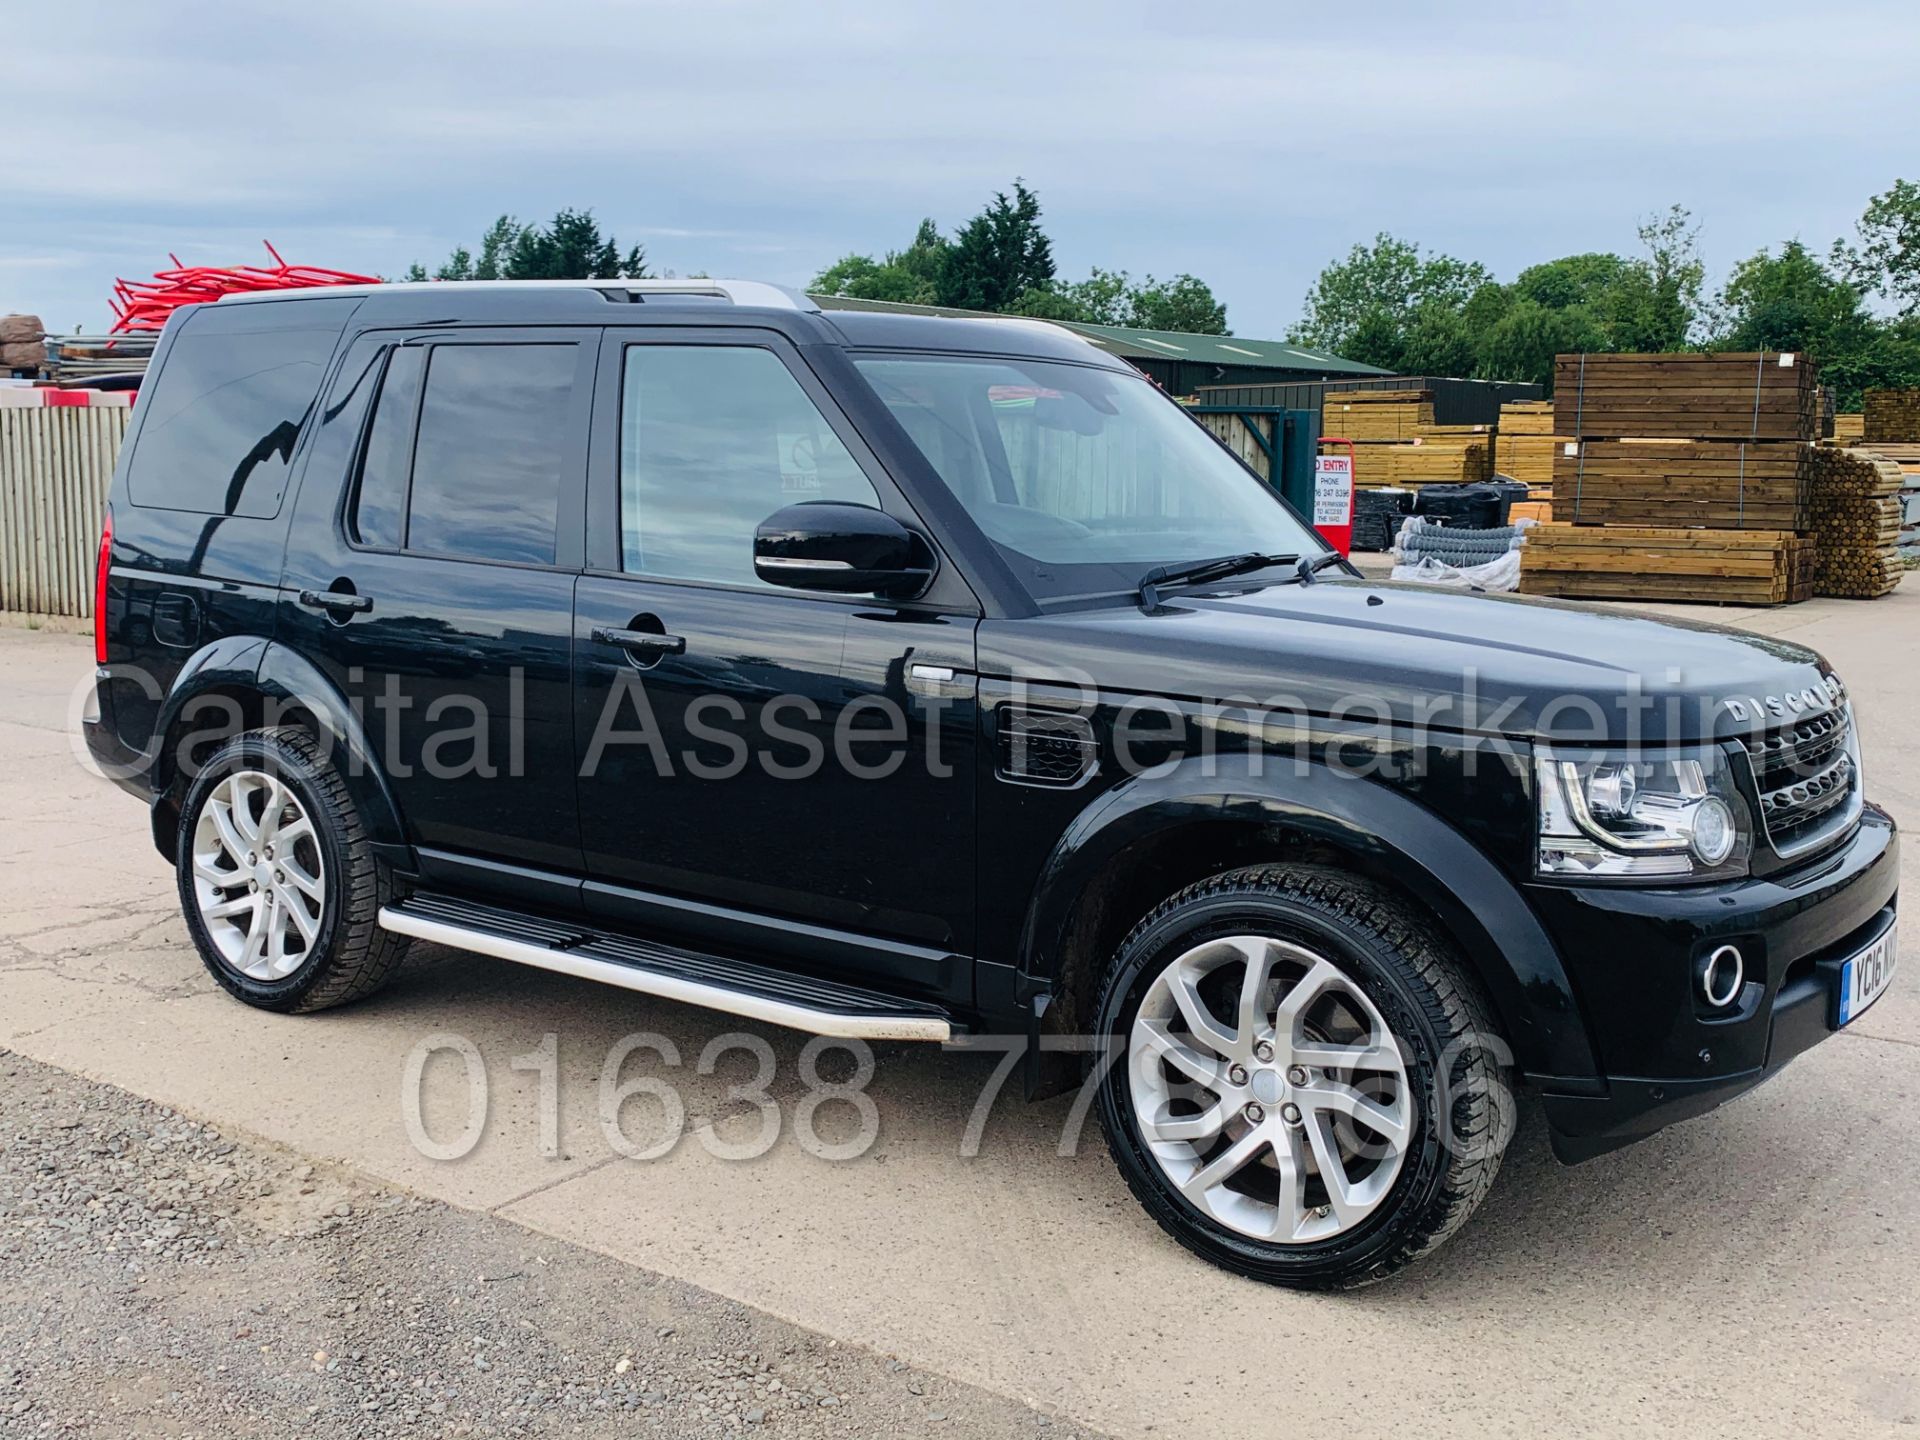 (On Sale) LAND ROVER DISCOVERY 4 *LANDMARK* 7 SEATER SUV (2016) '3.0 SDV6 - 8 SPEED AUTO' (1 OWNER)